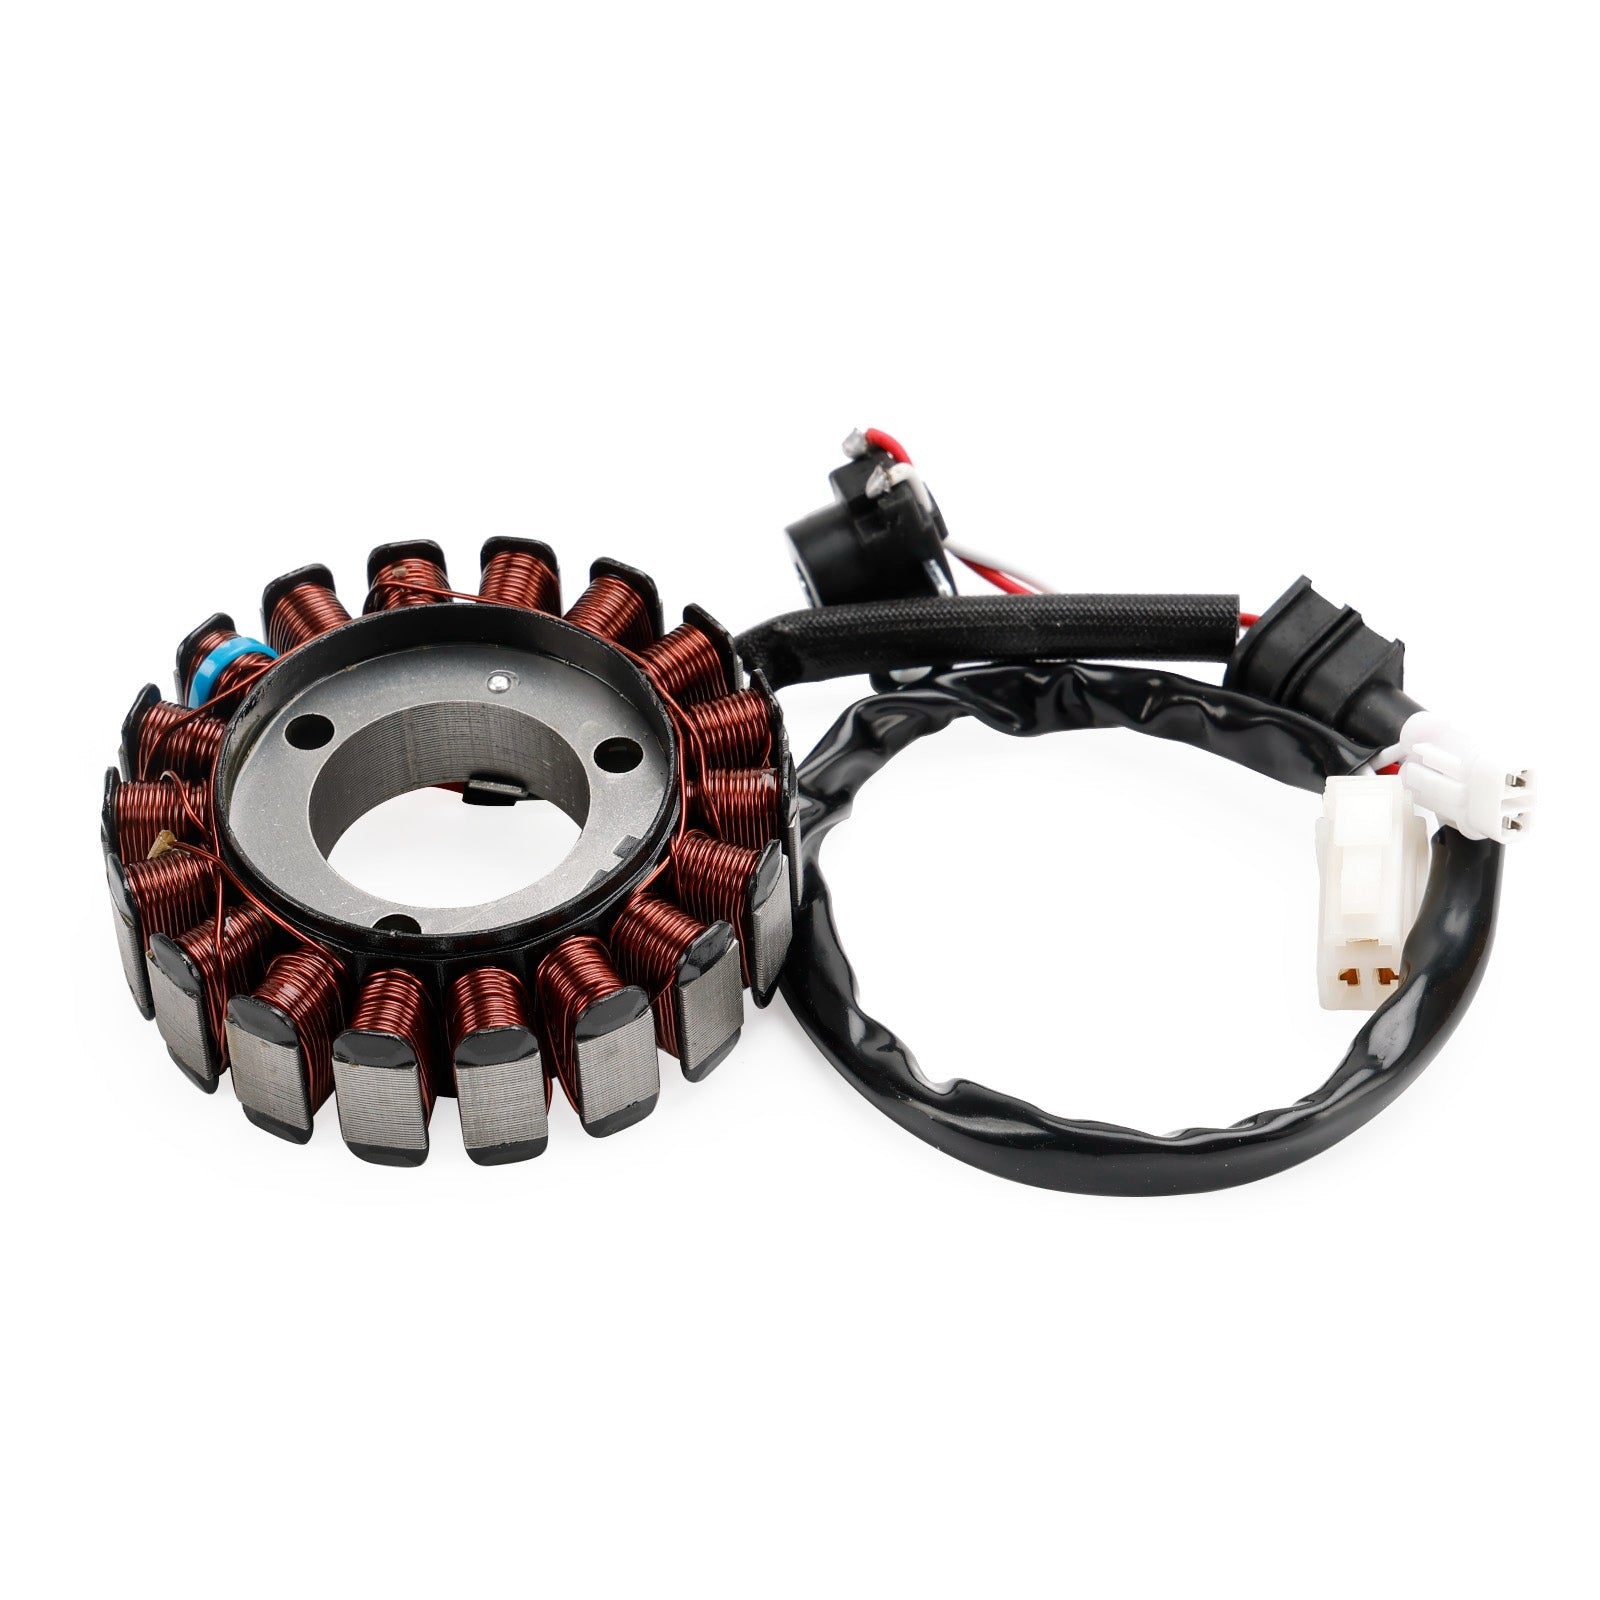 Yamaha YZF R125A YZF-R 125 ABS 2015-2018 Stator Magnéto + Redresseur de Tension + Joint